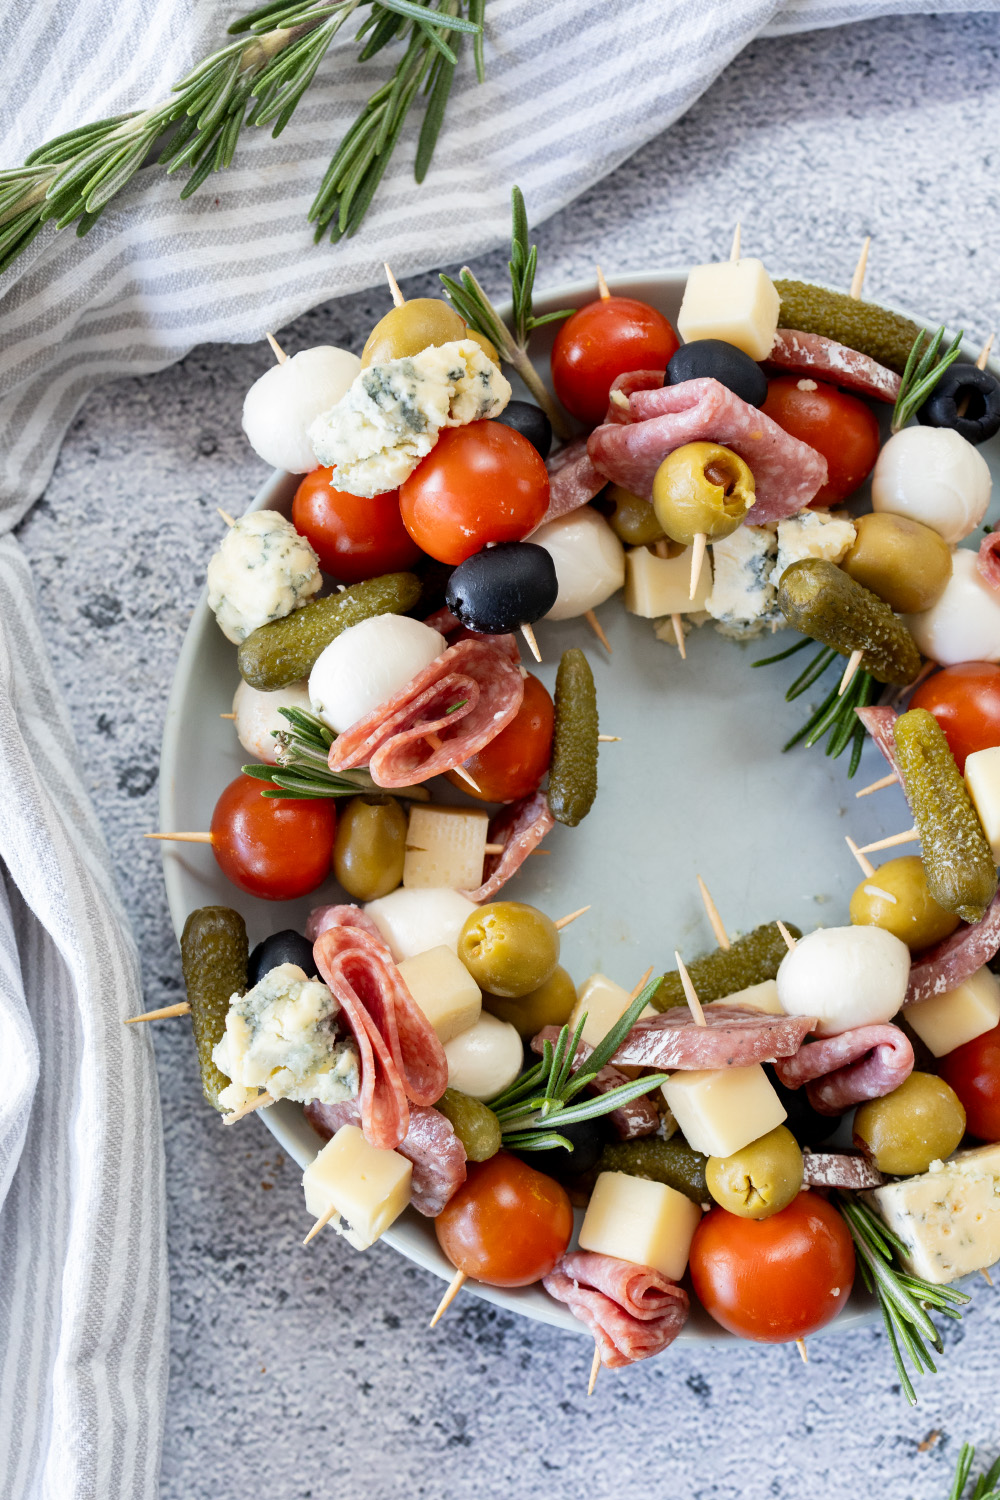 Antipasti skewers - cold party finger food